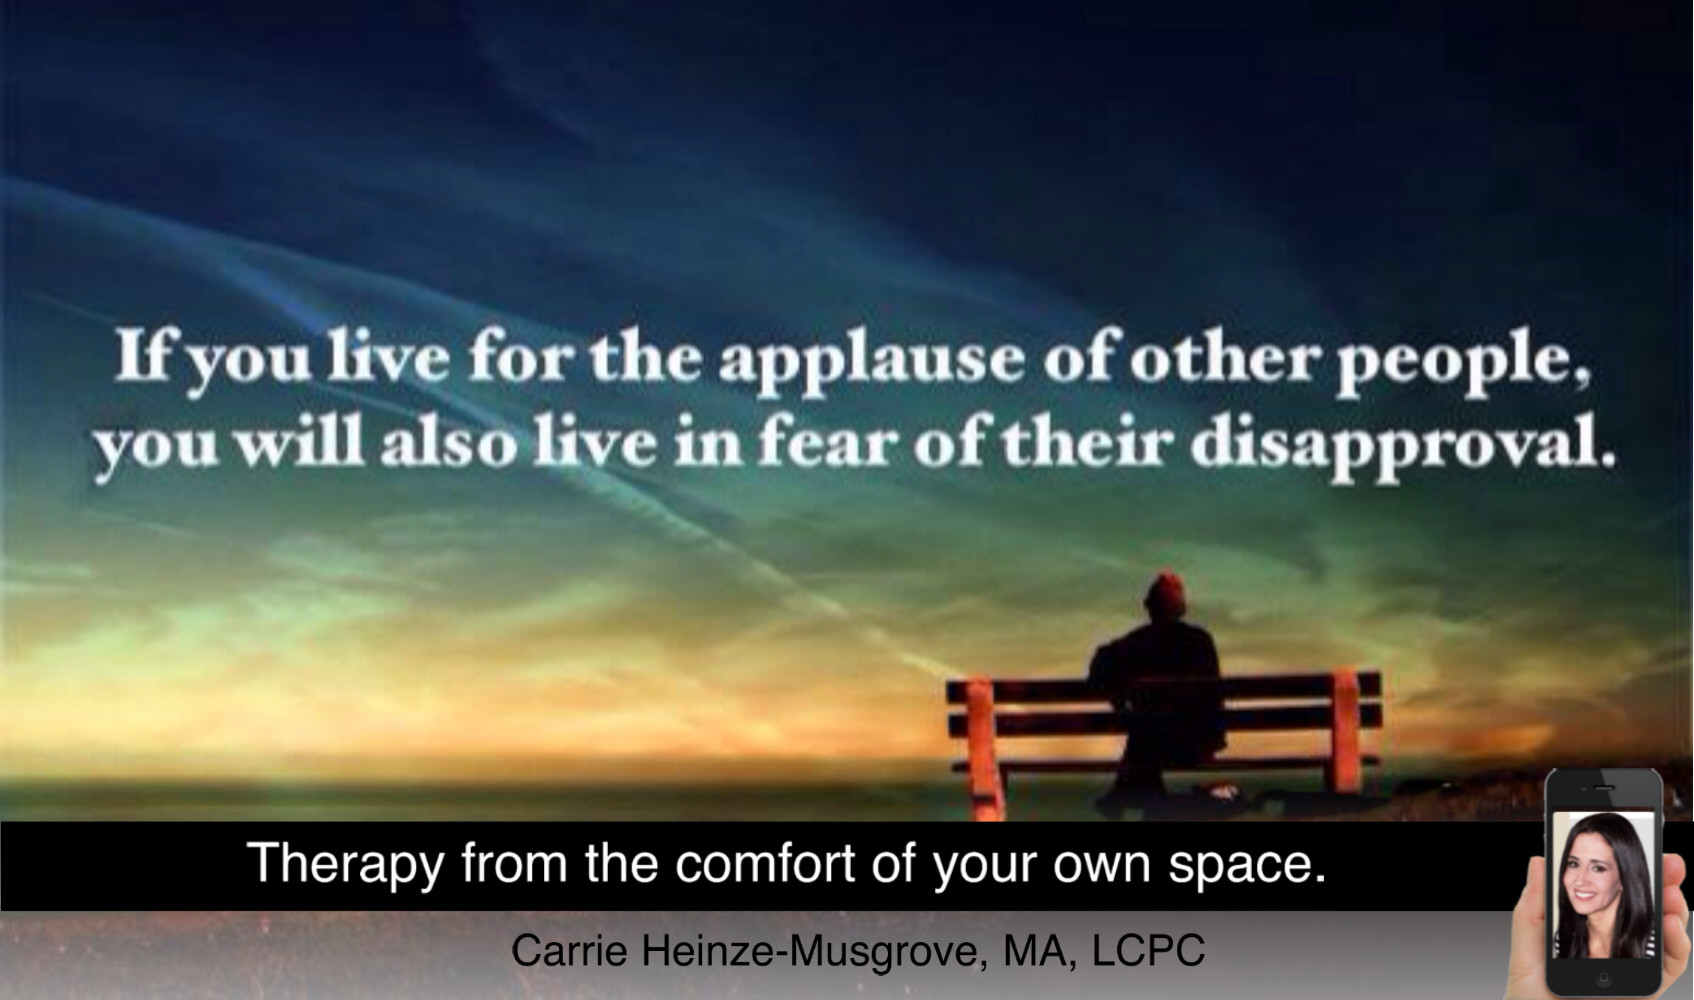 Living for the applause of others.